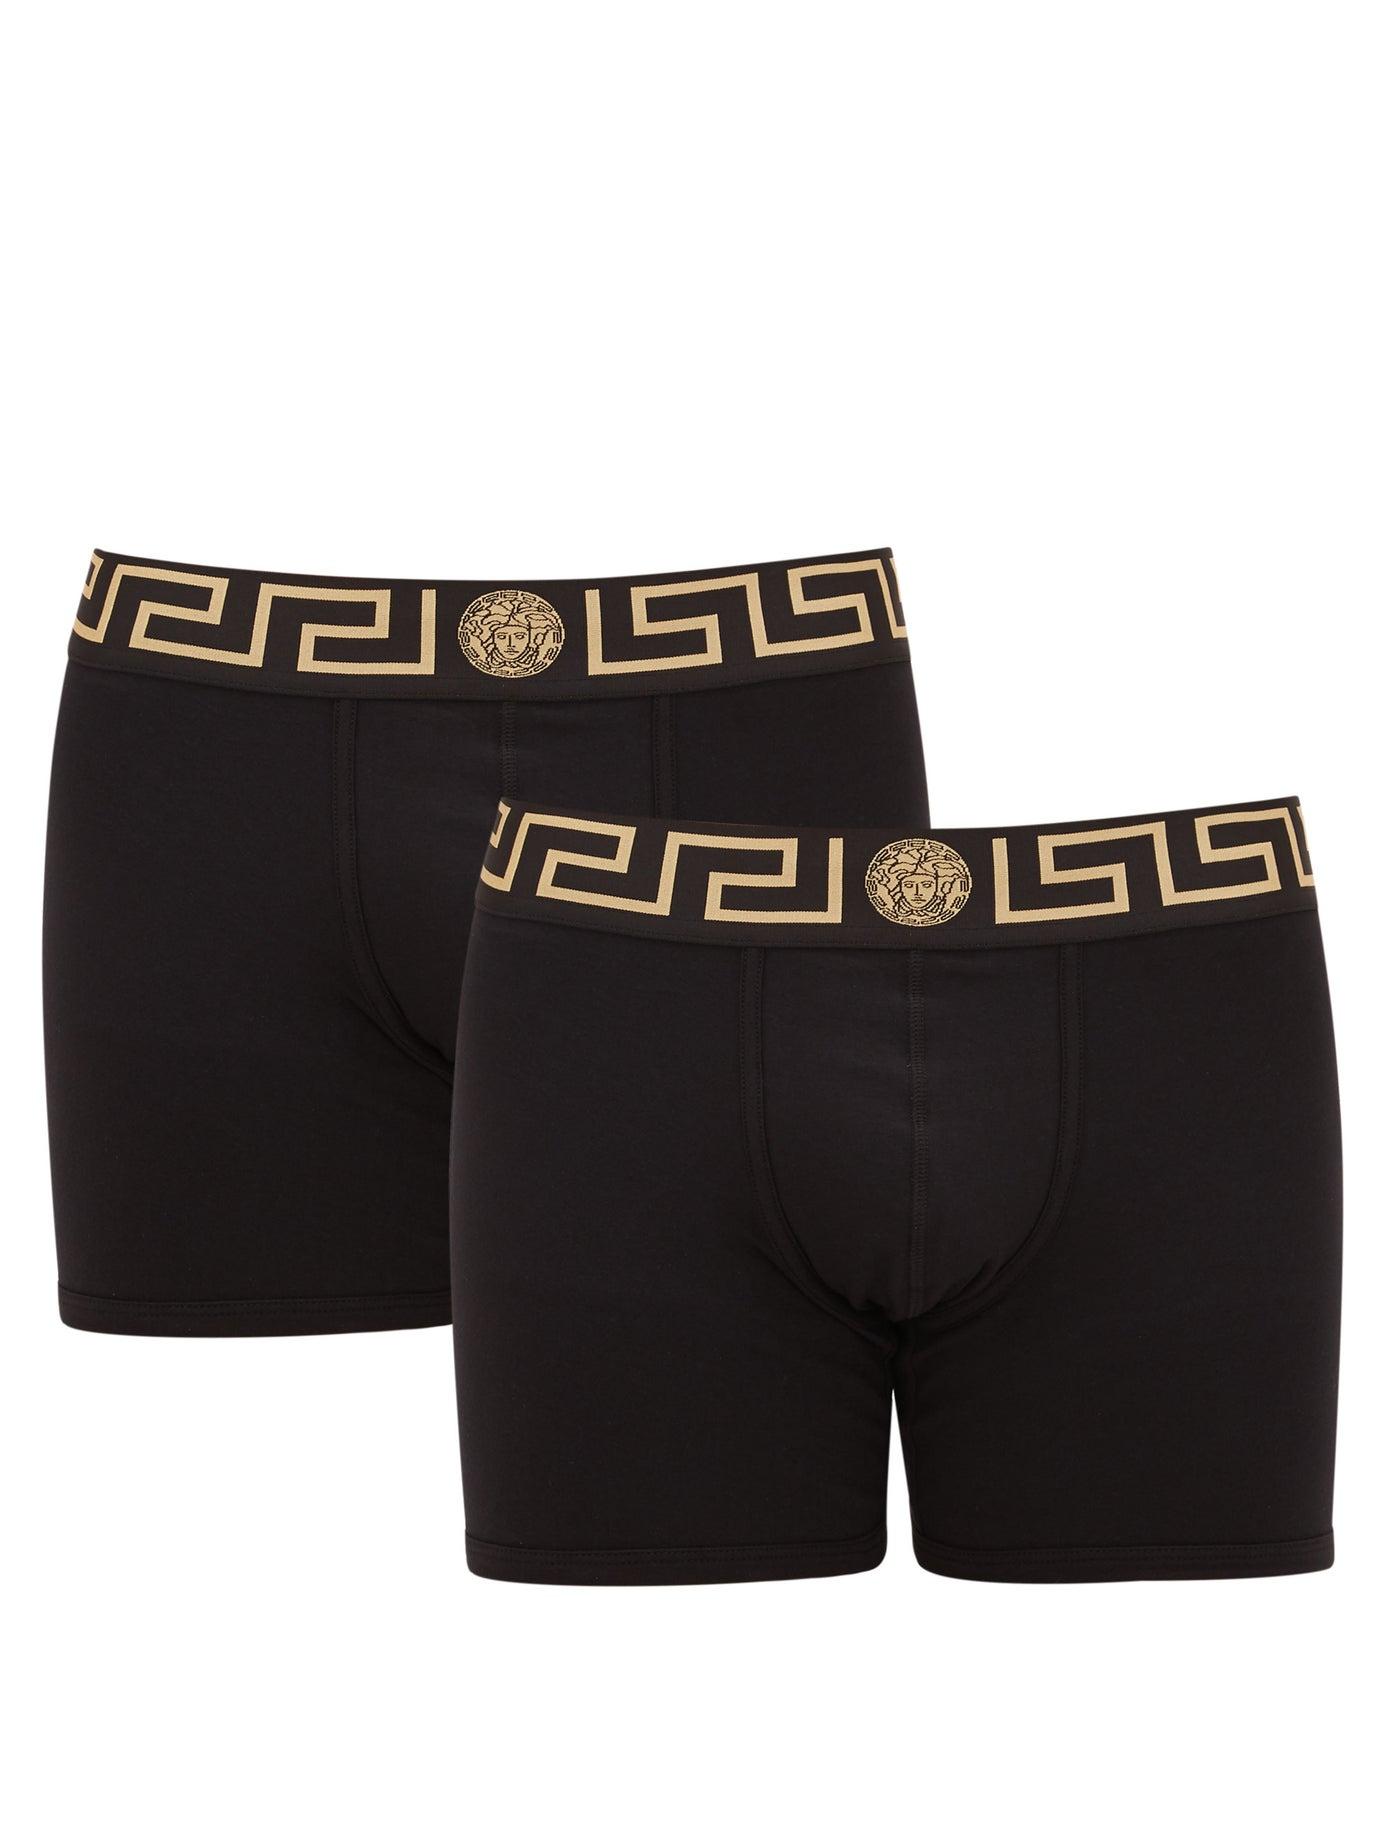 Versace Pack Of Two Logo-jacquard Boxer Briefs in Black for Men - Lyst